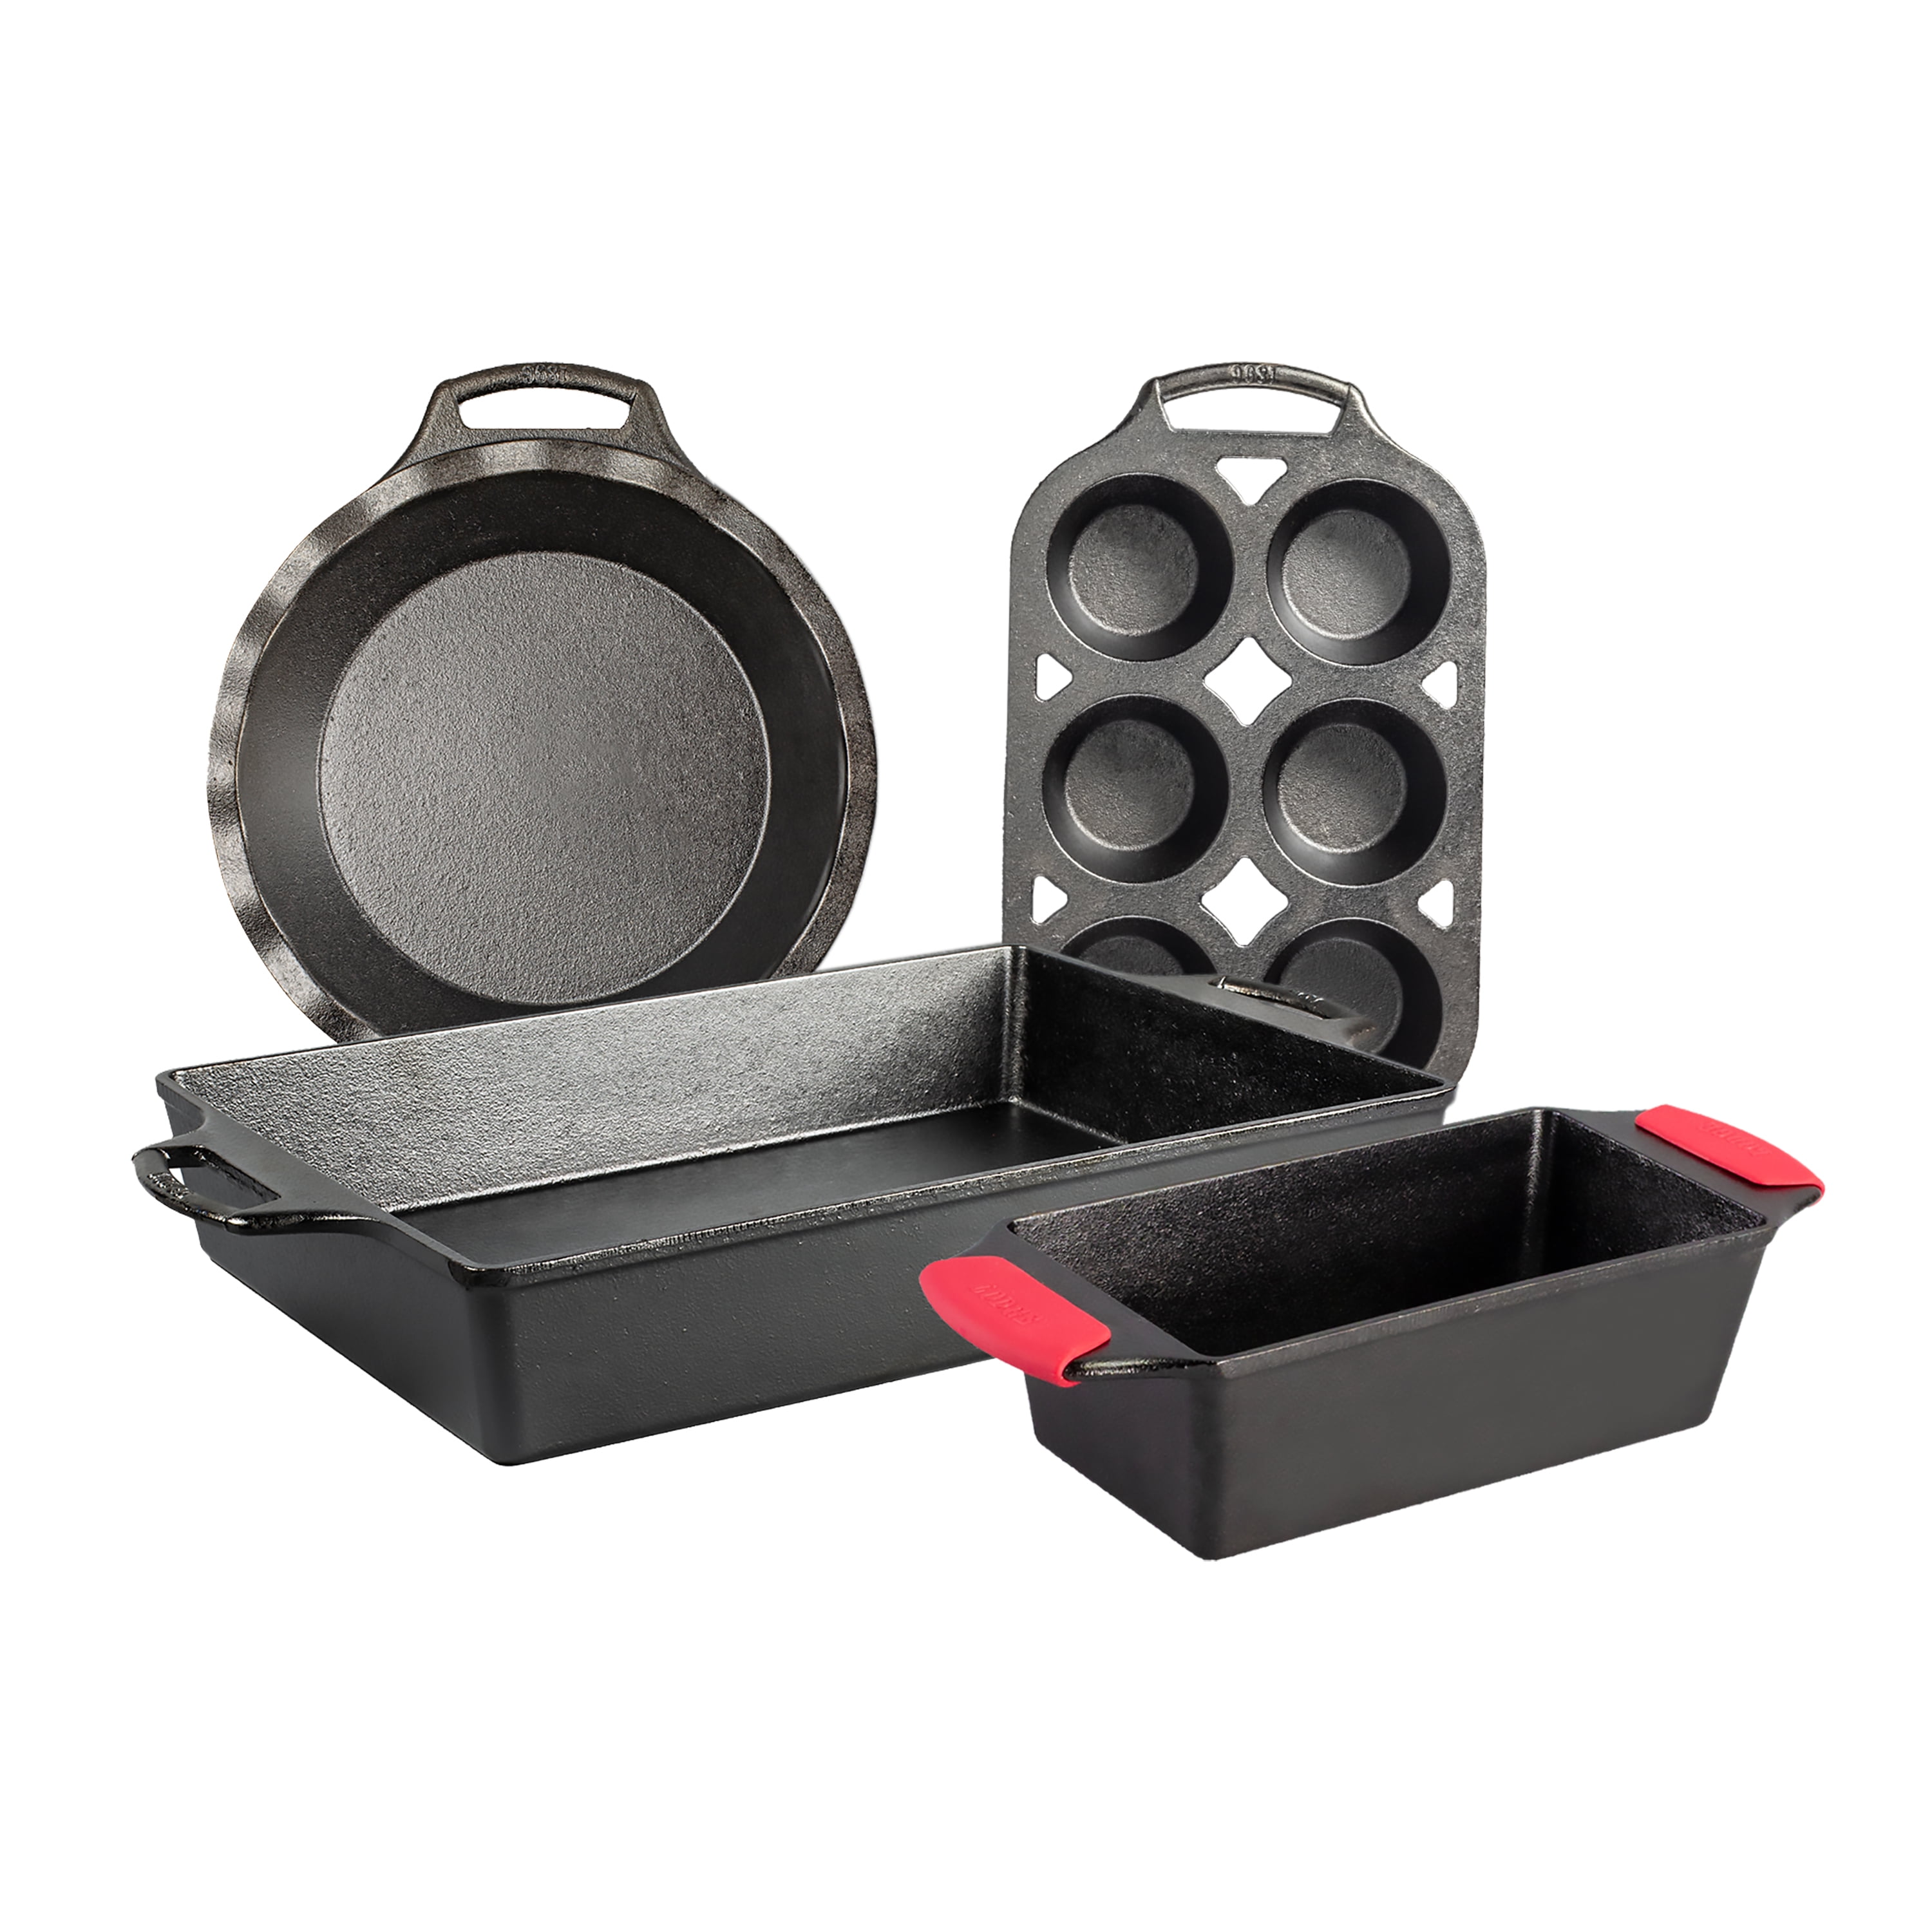 Lodge Cast Iron Pie Pan 9 with Silicone Grip + Reviews